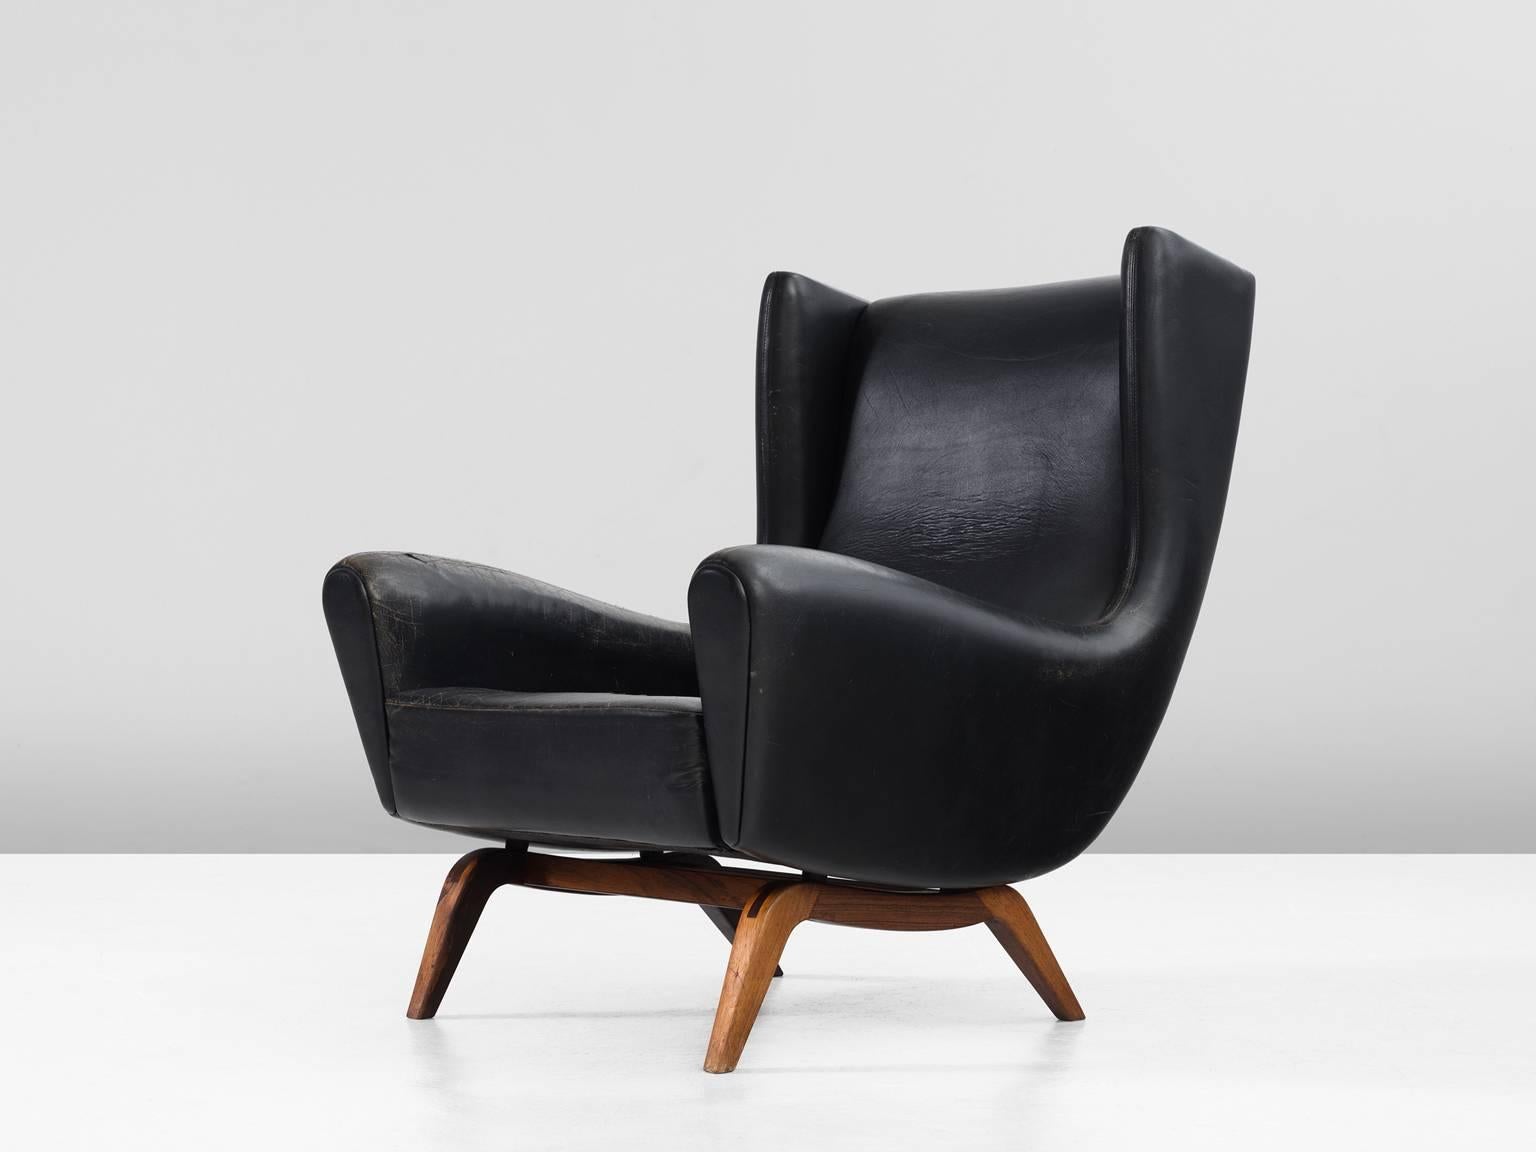 Lounge chair model 110 in leather and rosewood by Illum Wikkelsø for Søren Willadsen, Denmark, 1950s. 

This well-designed armchair shows an unusual elegance and great eye for detail, combined with outstanding craftsmanship, which is